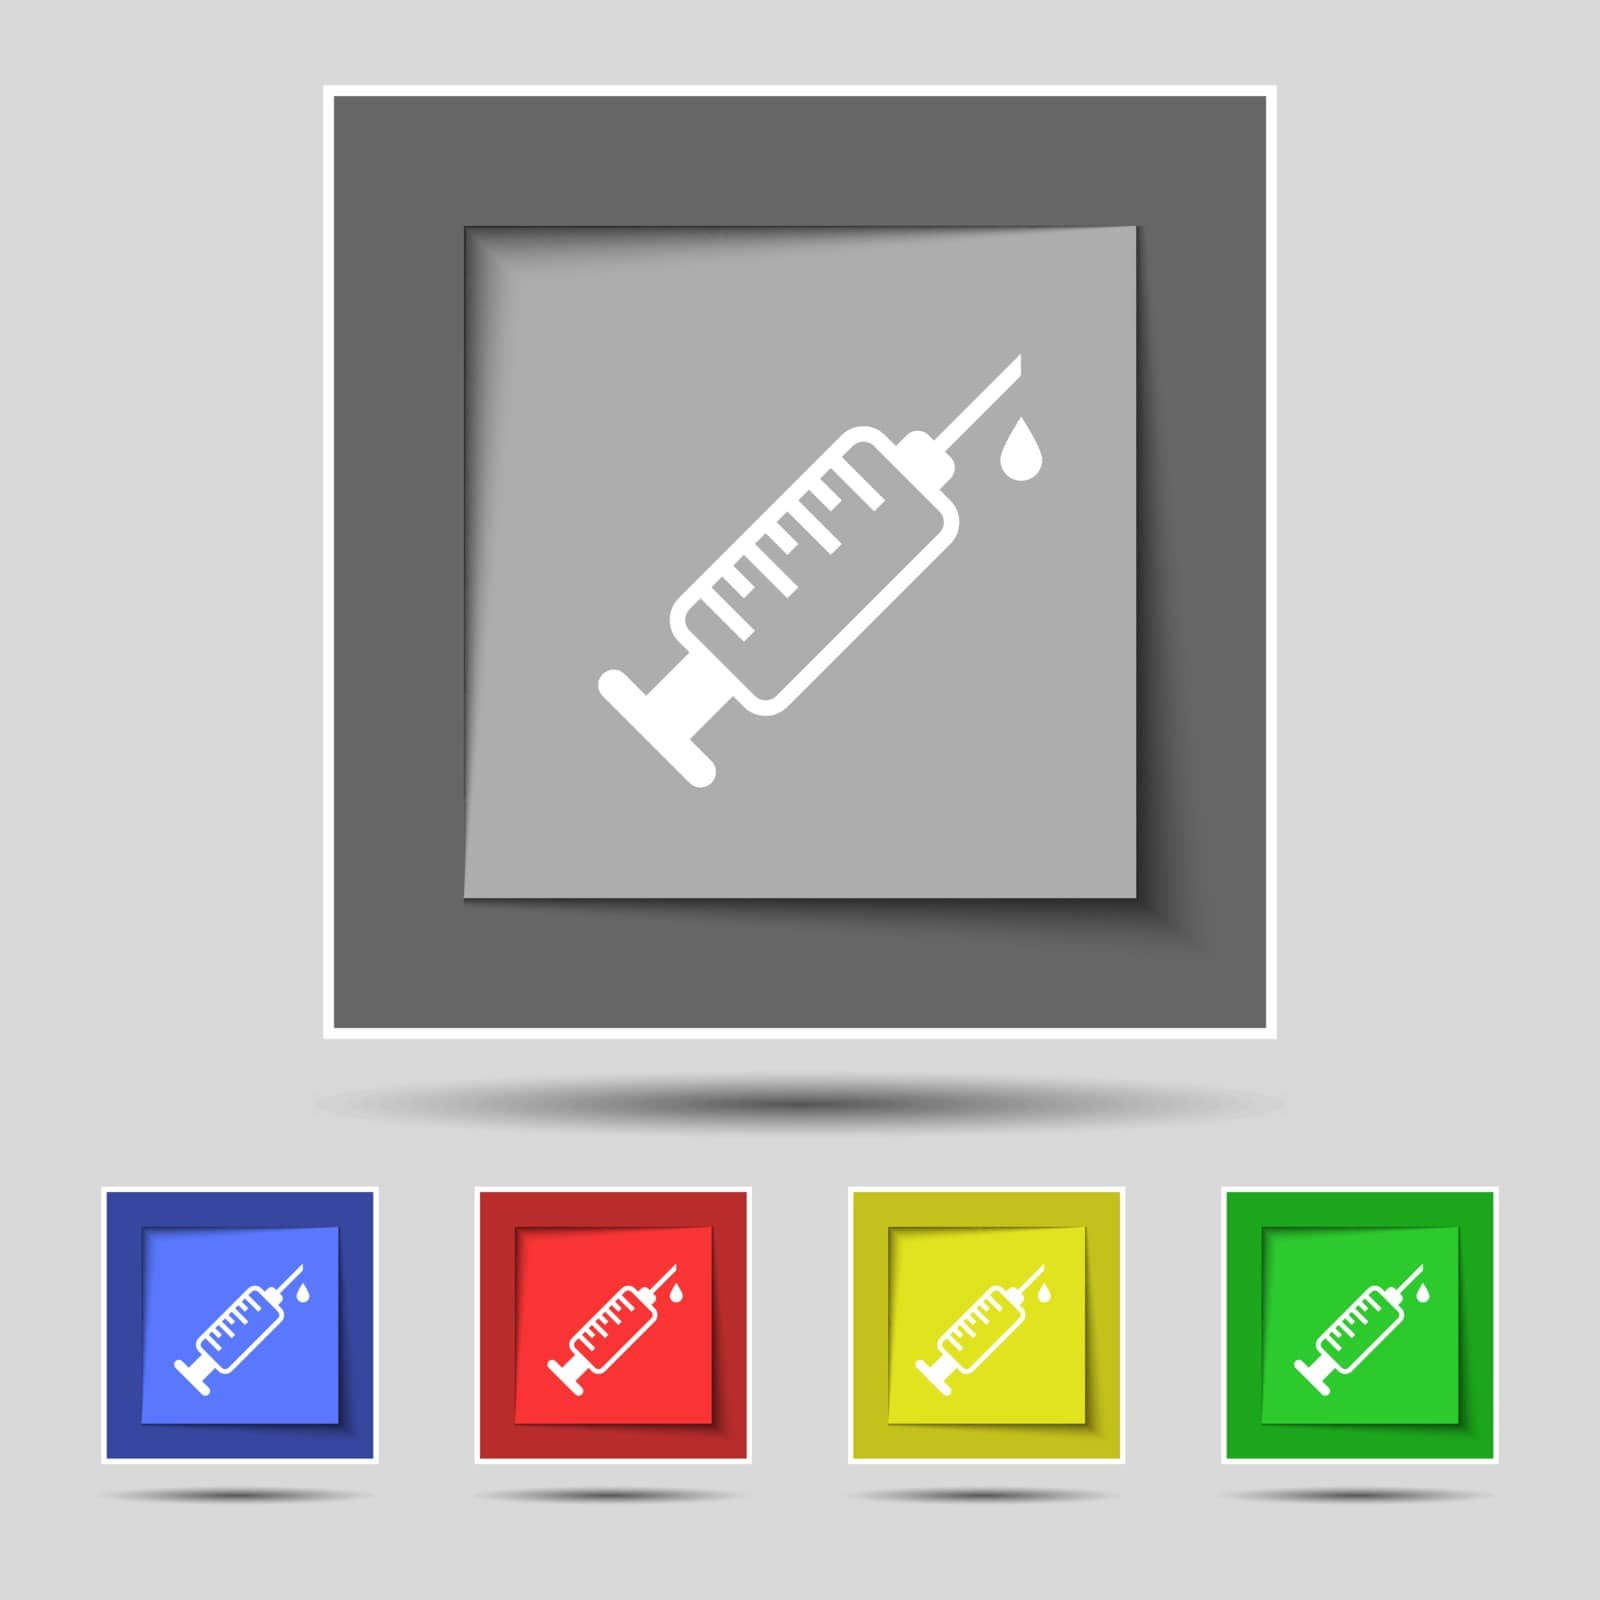 syringe icon sign on original five colored buttons. Vector illustration